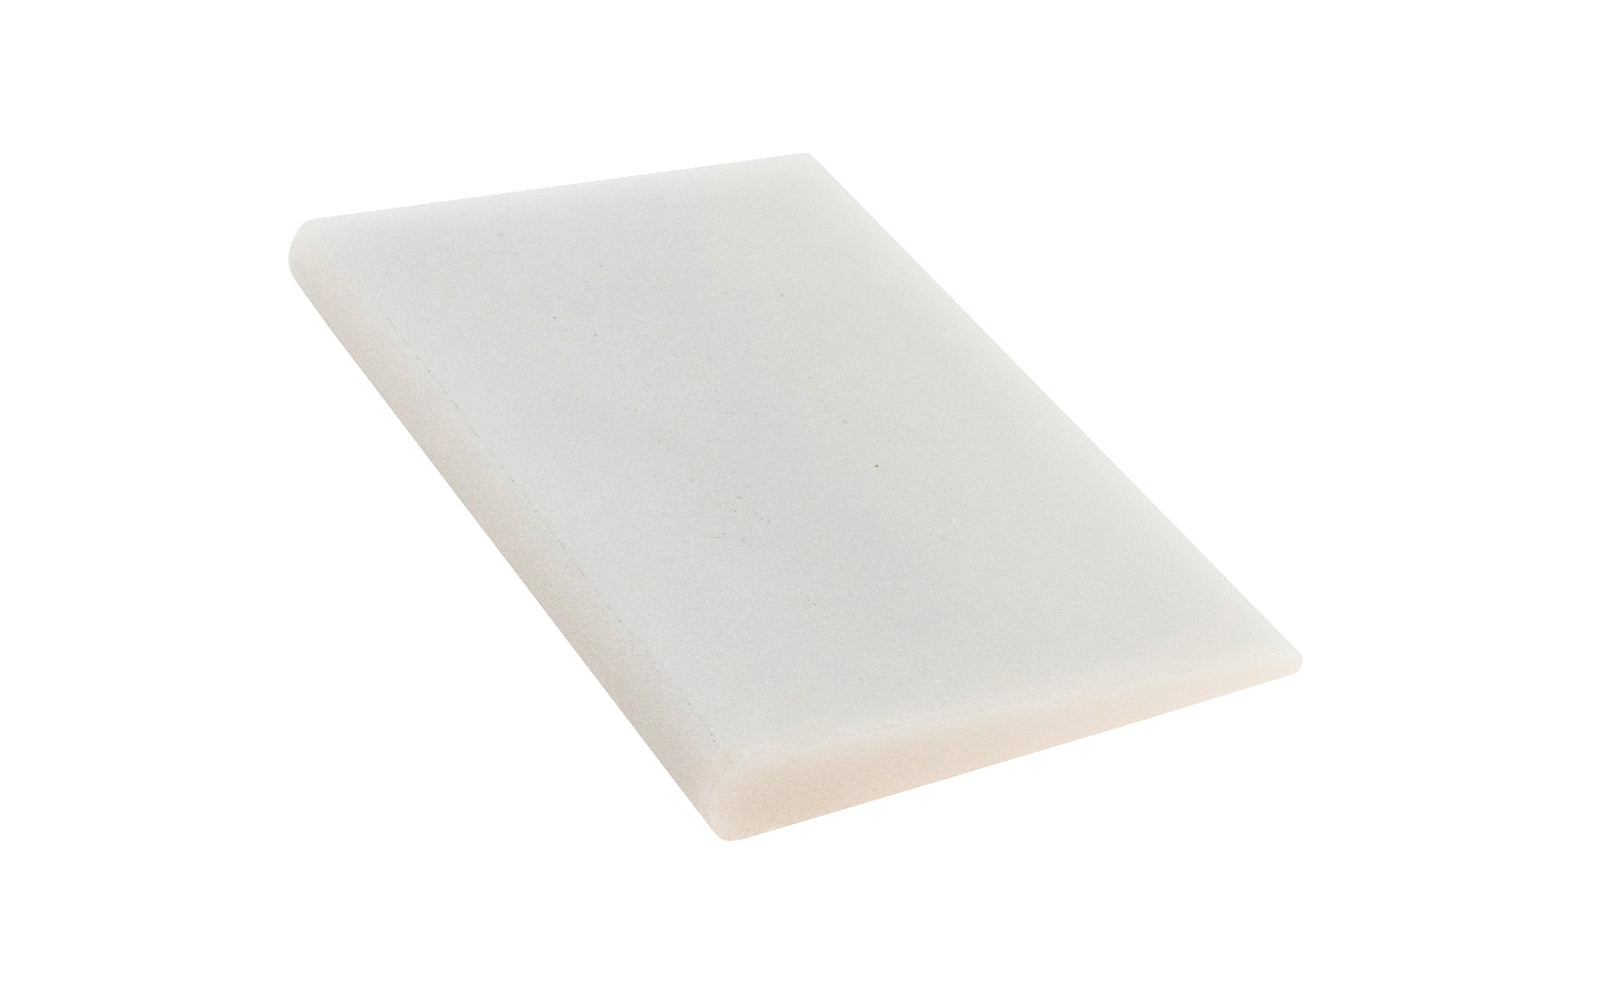 Norton Hard White Translucent Arkansas Round Edge Slip Stone. Great for final edge sharpening of carving tools & gouges. Use a few drops of mineral oil to prevent glazing while sharpening. 3" length  x  1-3/4" width  -  1/4" x 1/16" round edge radius. Made by Norton, Saint Gobain. Model HS3. Made in USA. 614636870403